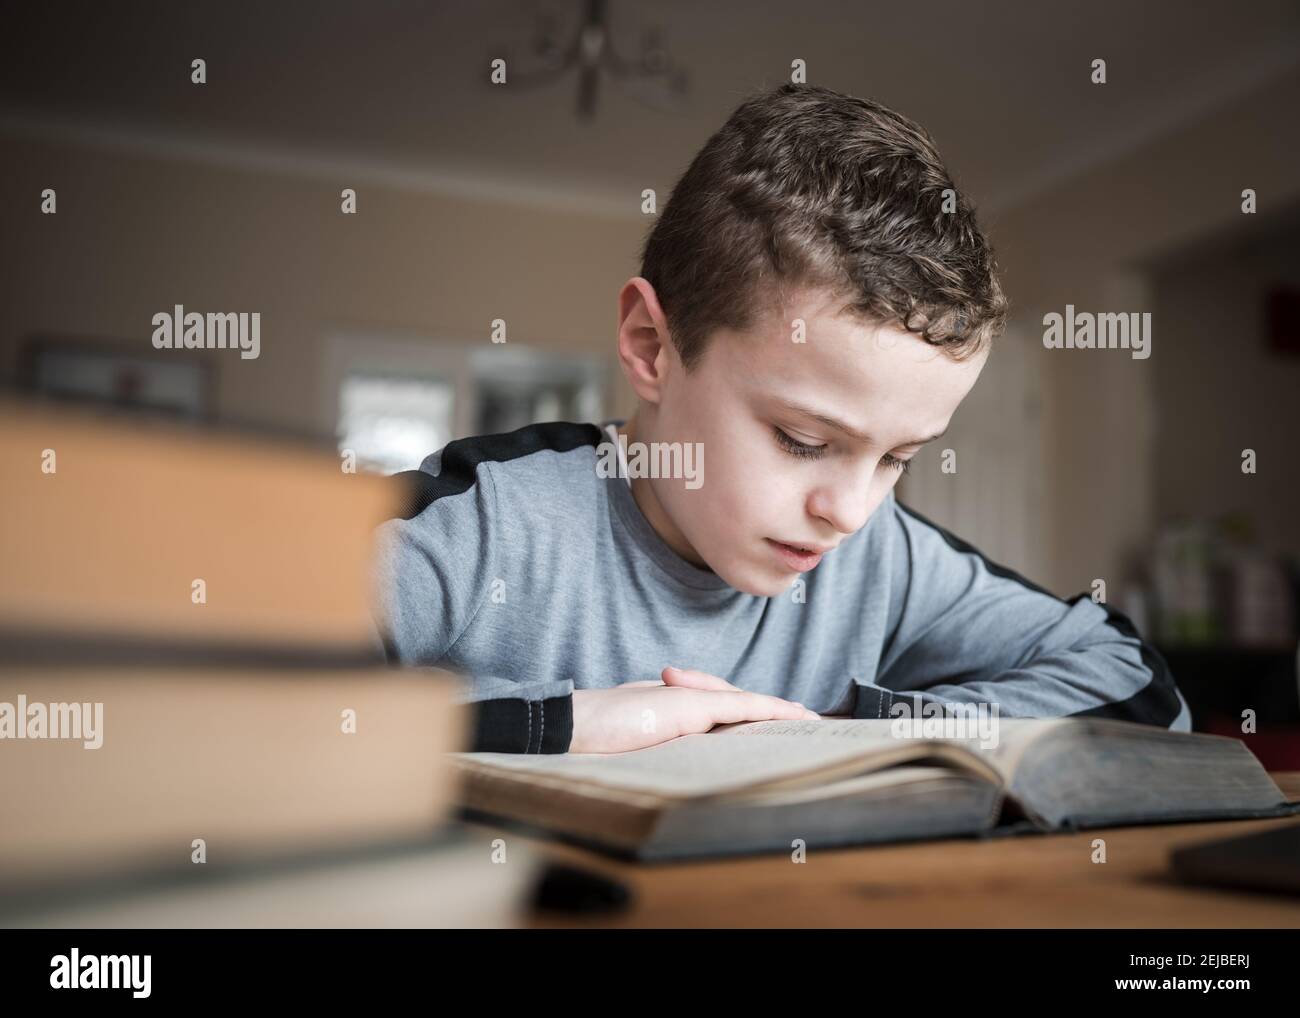 Cute young boy sat reading big old book concentrating hard at wooden table homeschool handsome focused intensely on learning in front room pile books Stock Photo